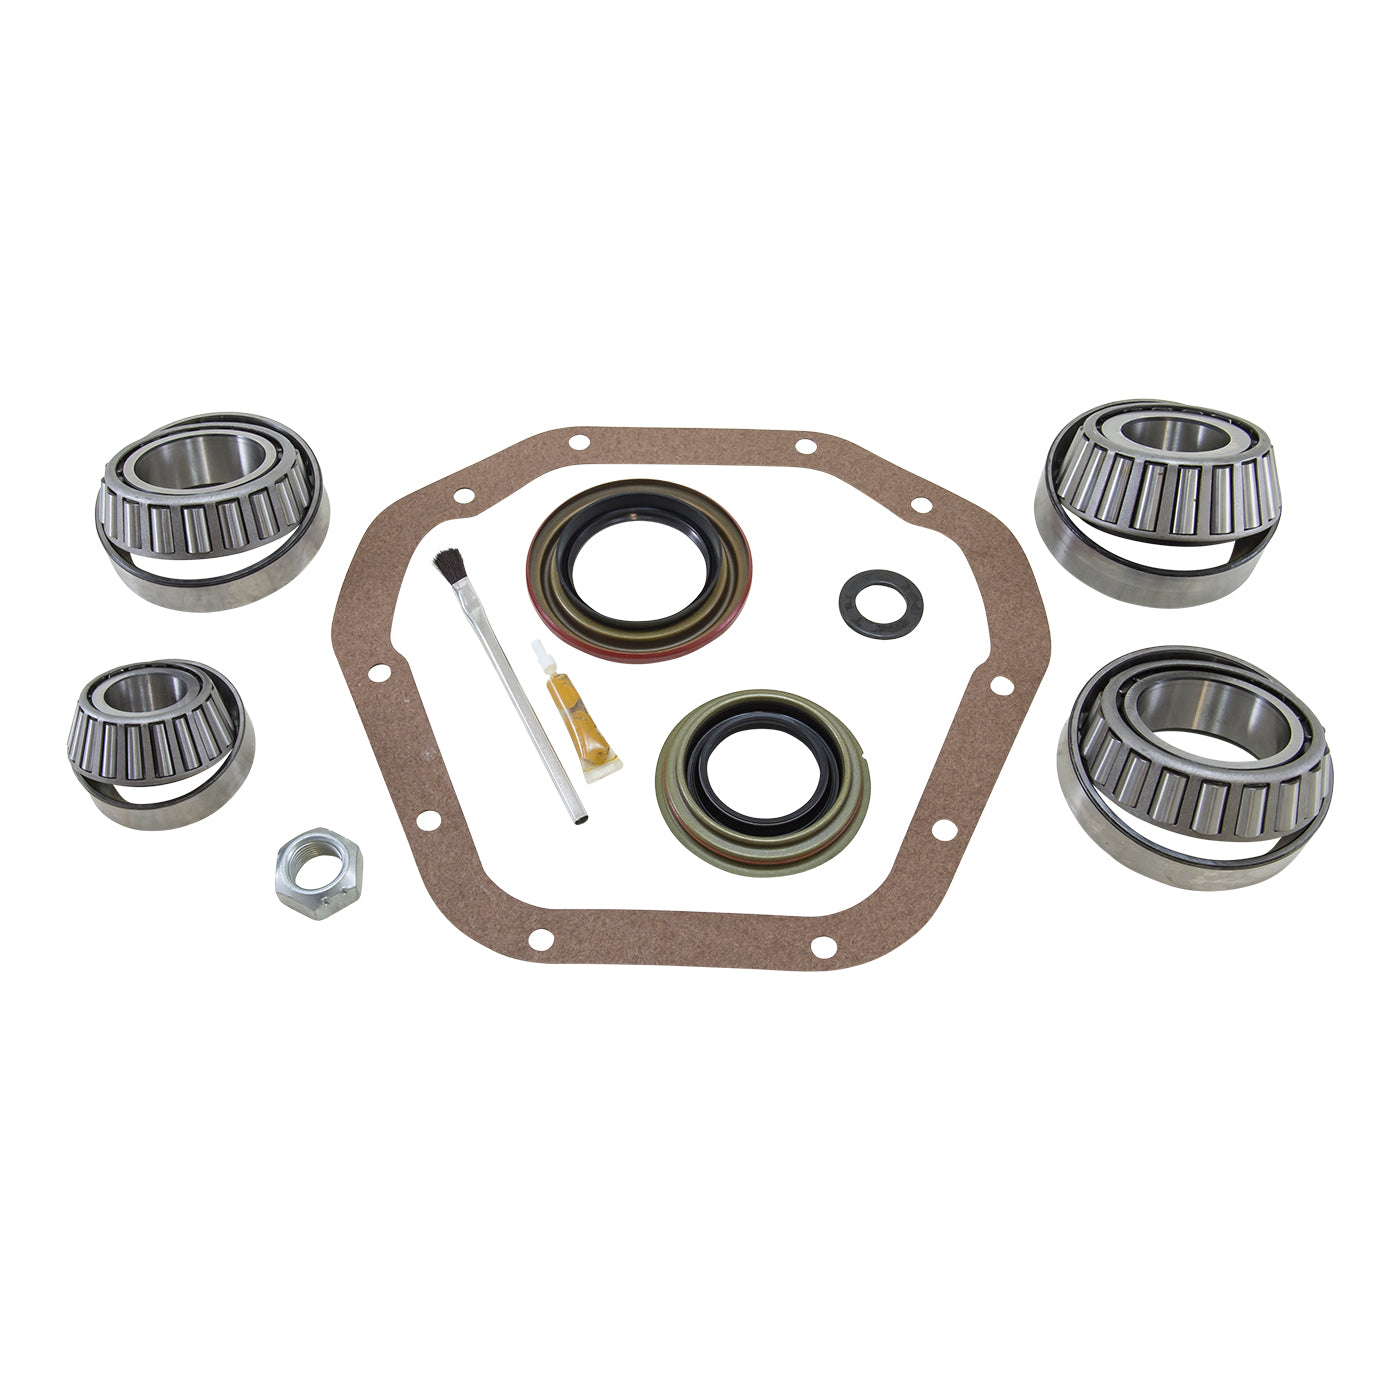 Yukon Gear Bearing install kit for '99-'07 Ford 10.5" differential BK F10.5